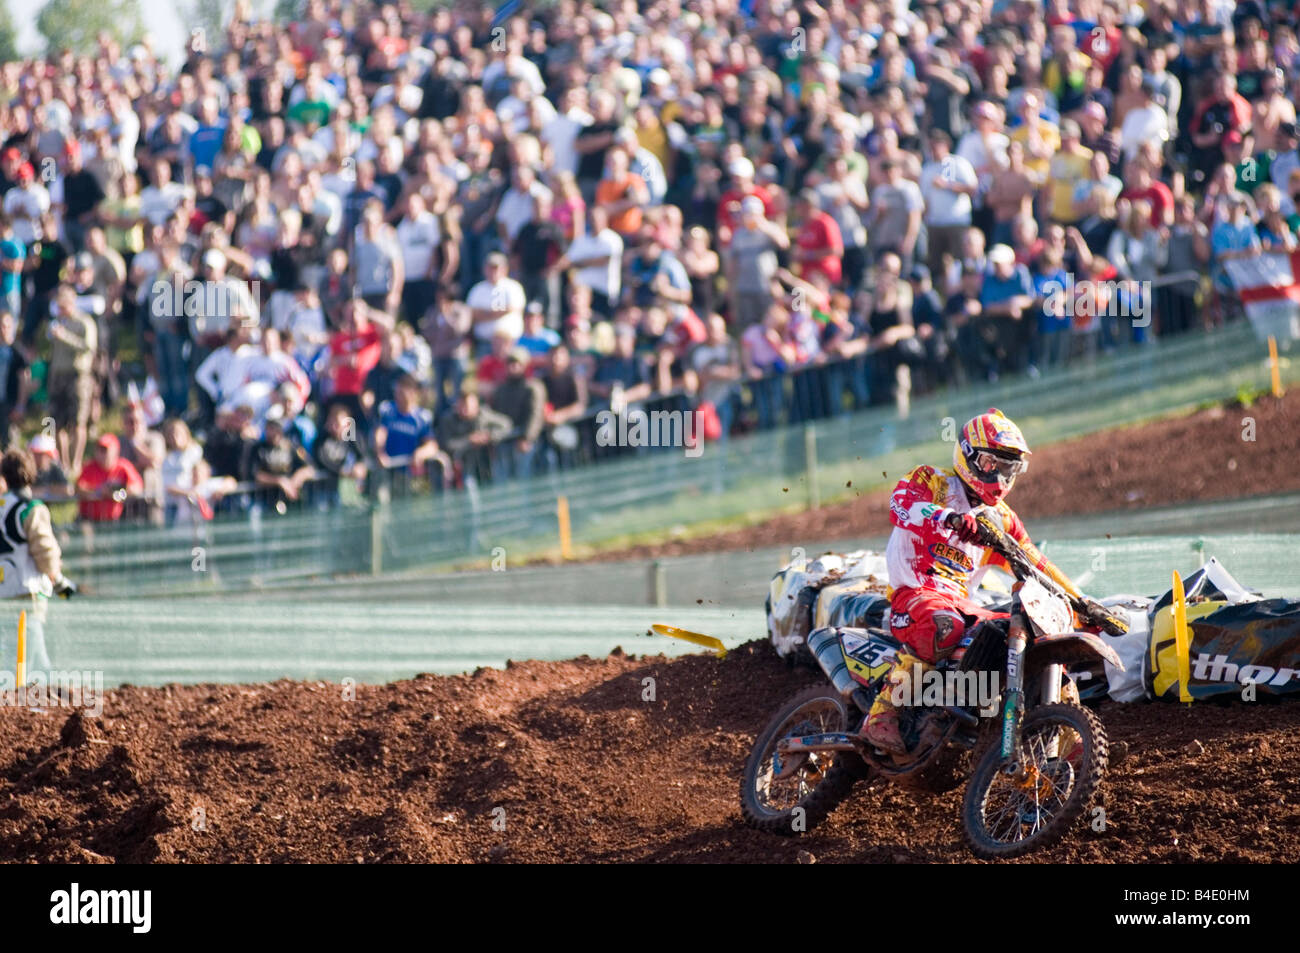 big crowd at a motocross race Stock Photo